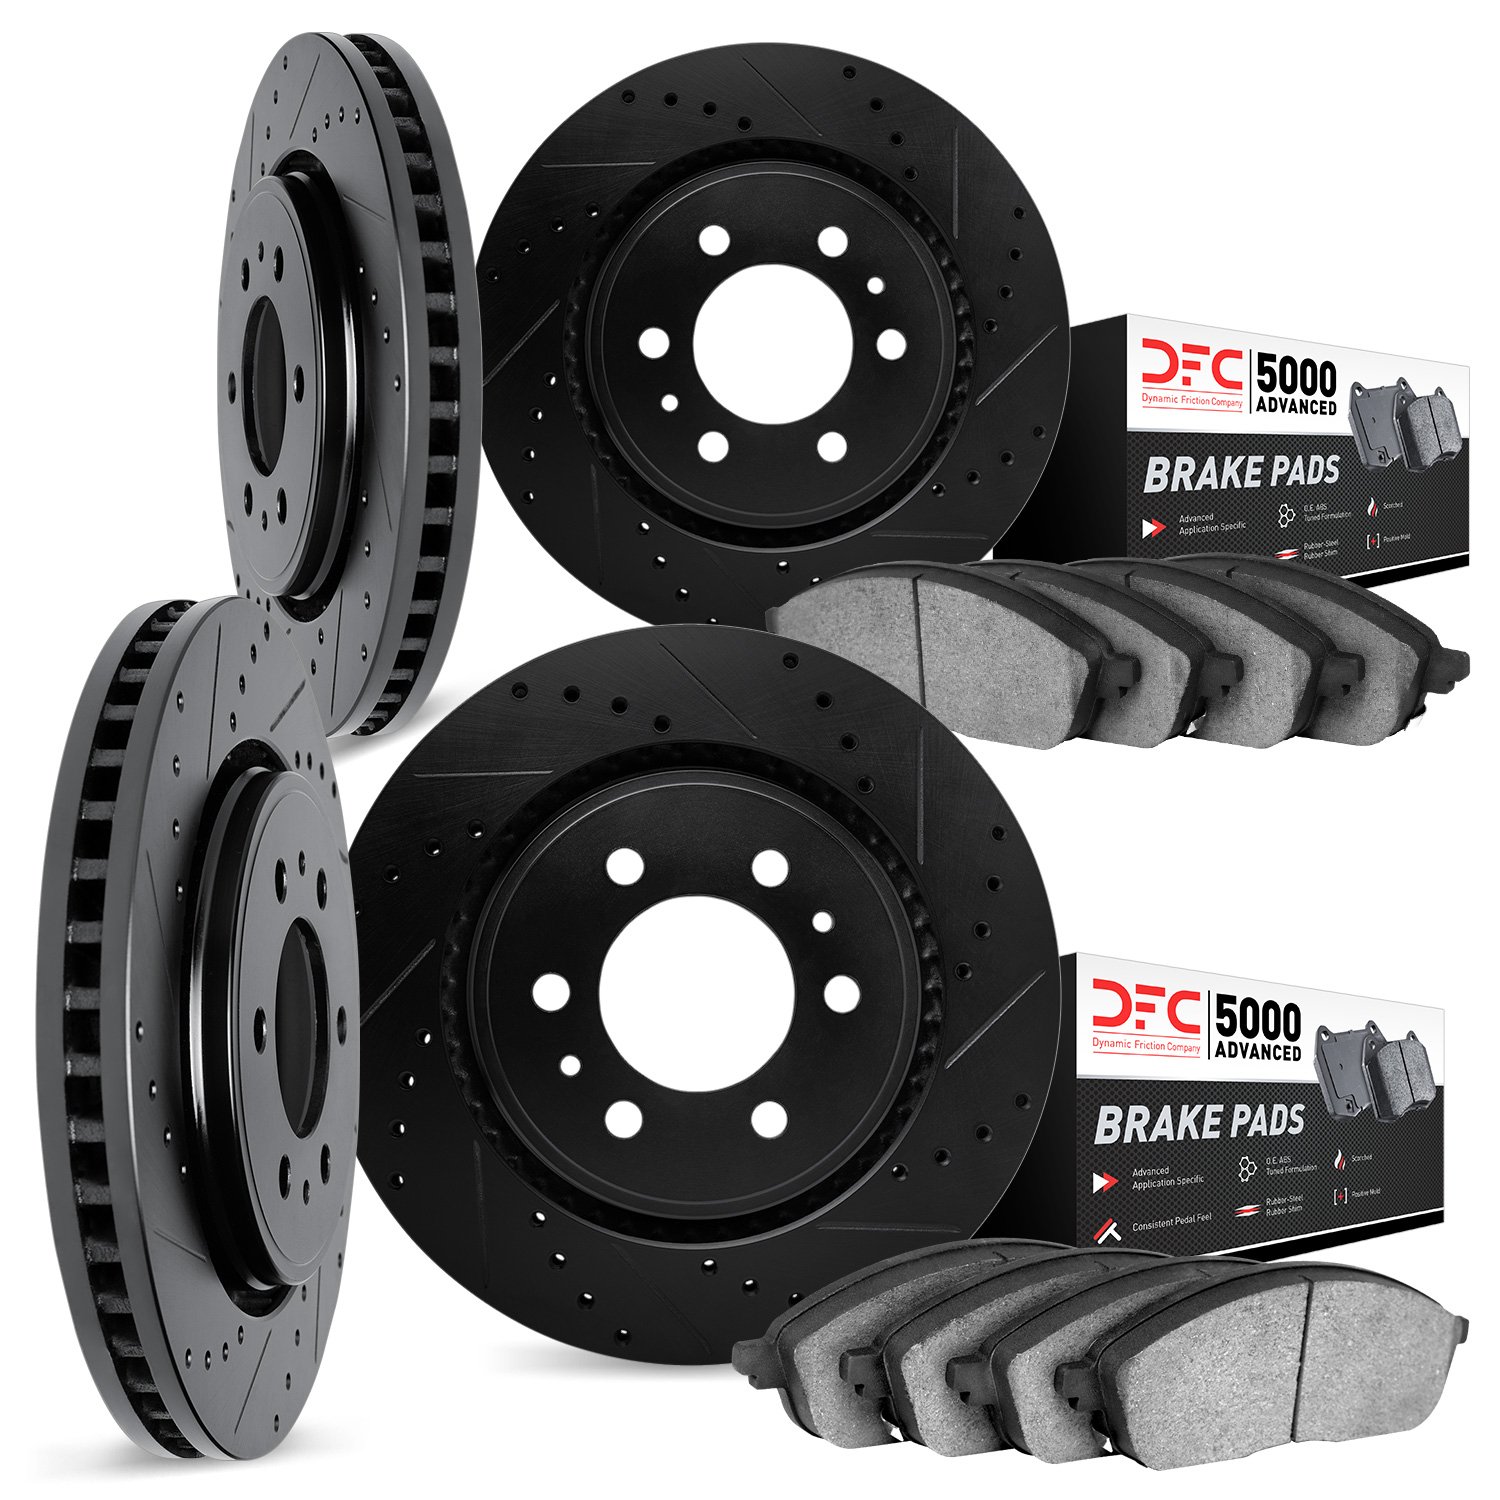 8504-48041 Drilled/Slotted Brake Rotors w/5000 Advanced Brake Pads Kit [Black], 2007-2014 GM, Position: Front and Rear